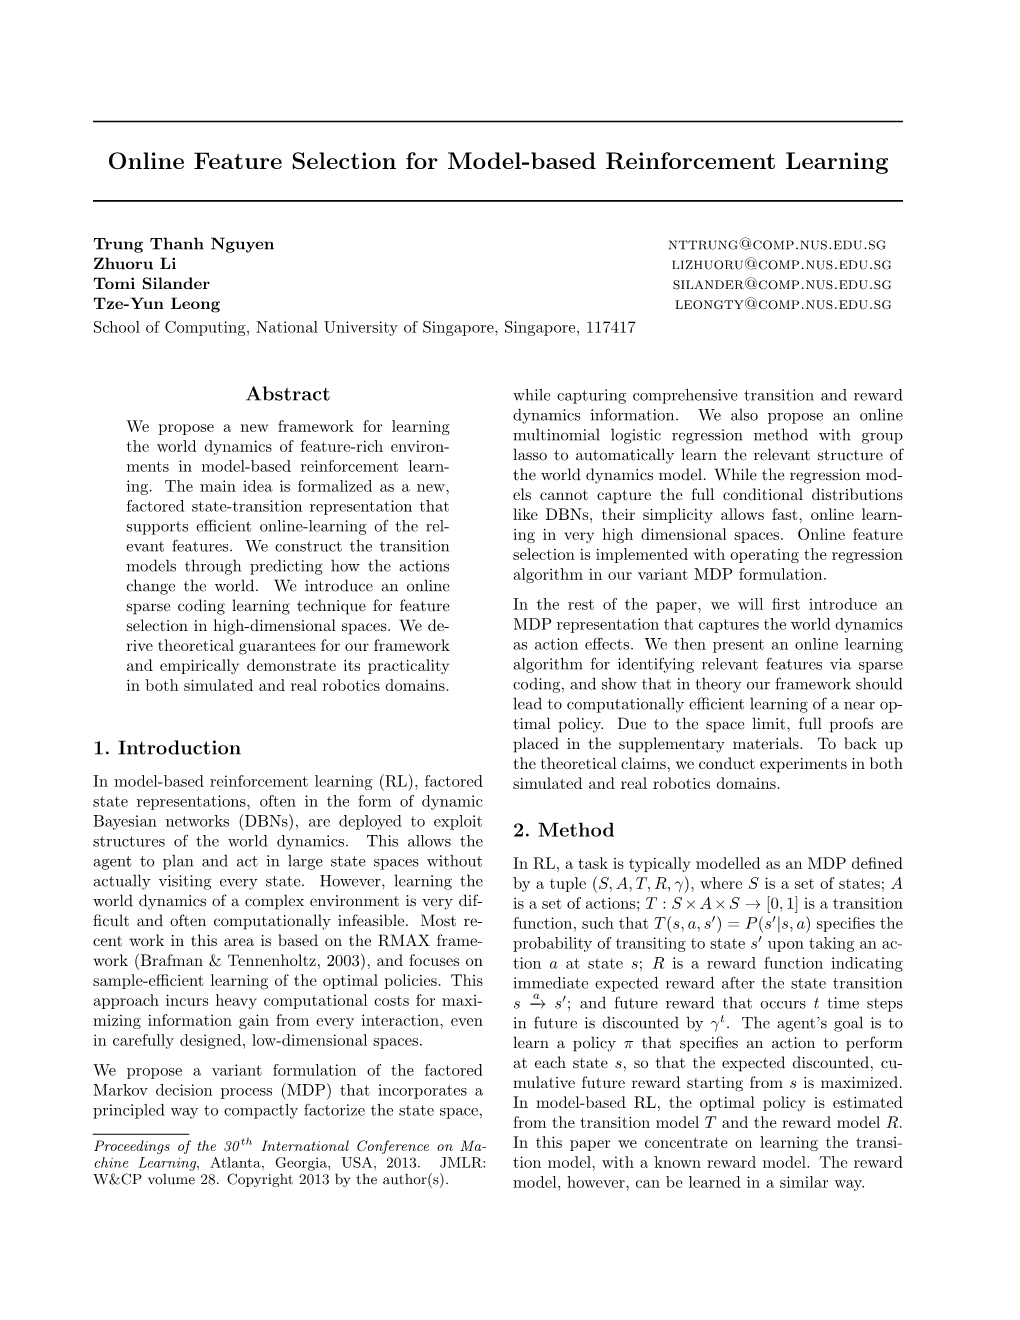 Online Feature Selection for Model-Based Reinforcement Learning